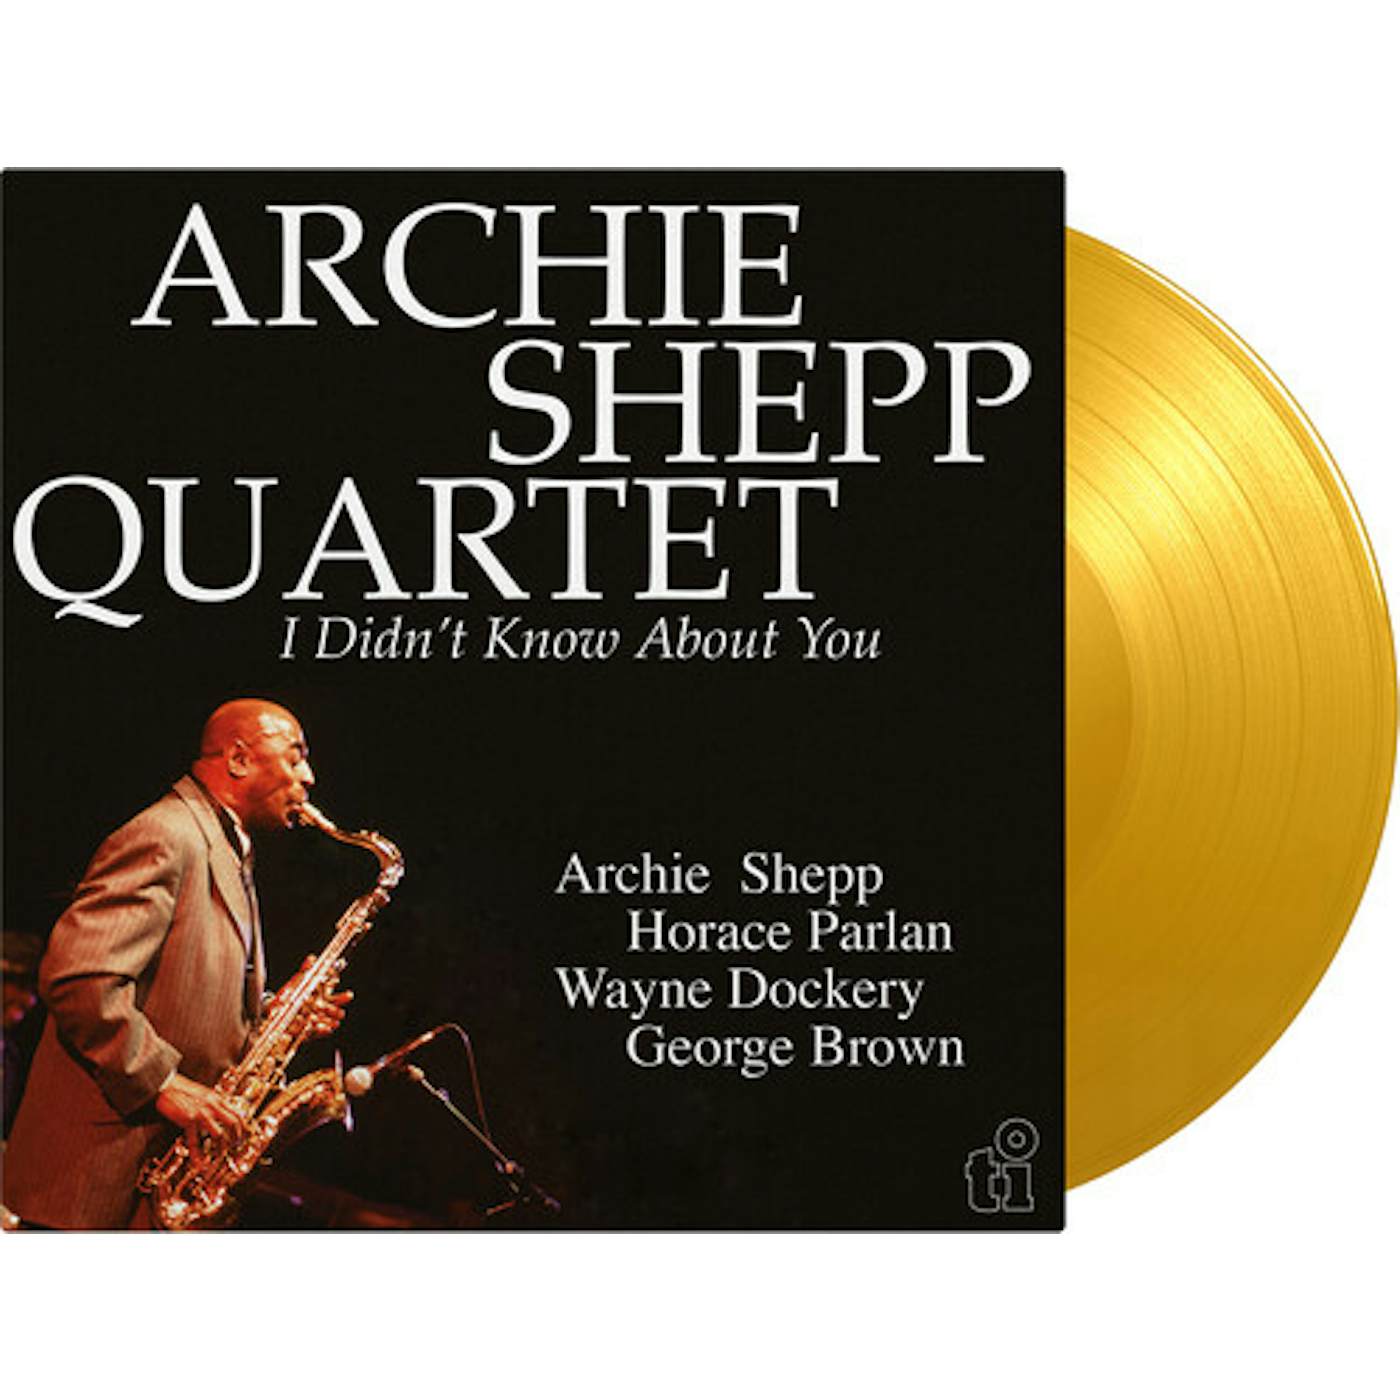 Archie Shepp I DIDN'T KNOW ABOUT YOU Vinyl Record